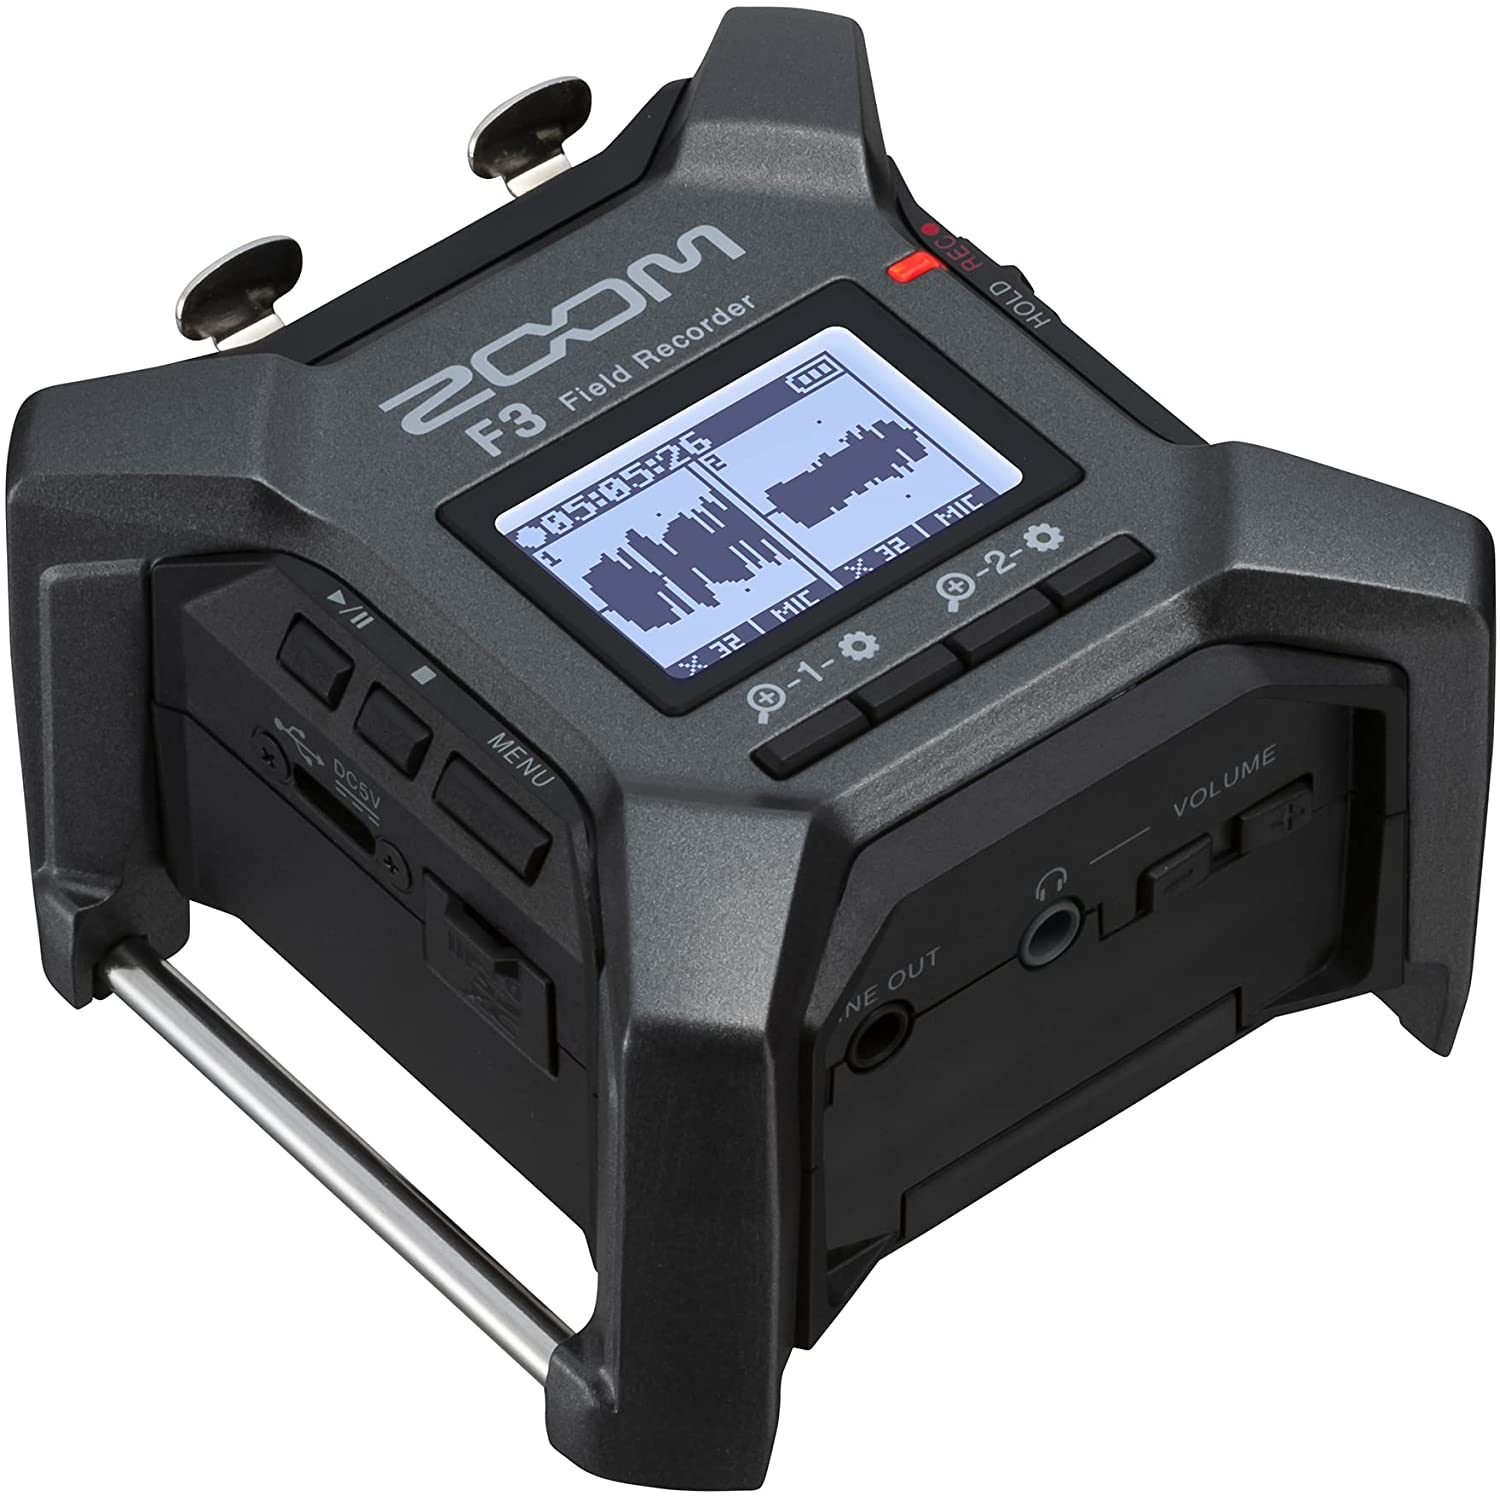 First look: Zoom F3 2-track 32-bit float recorder with 48 kHz sampling rate 22